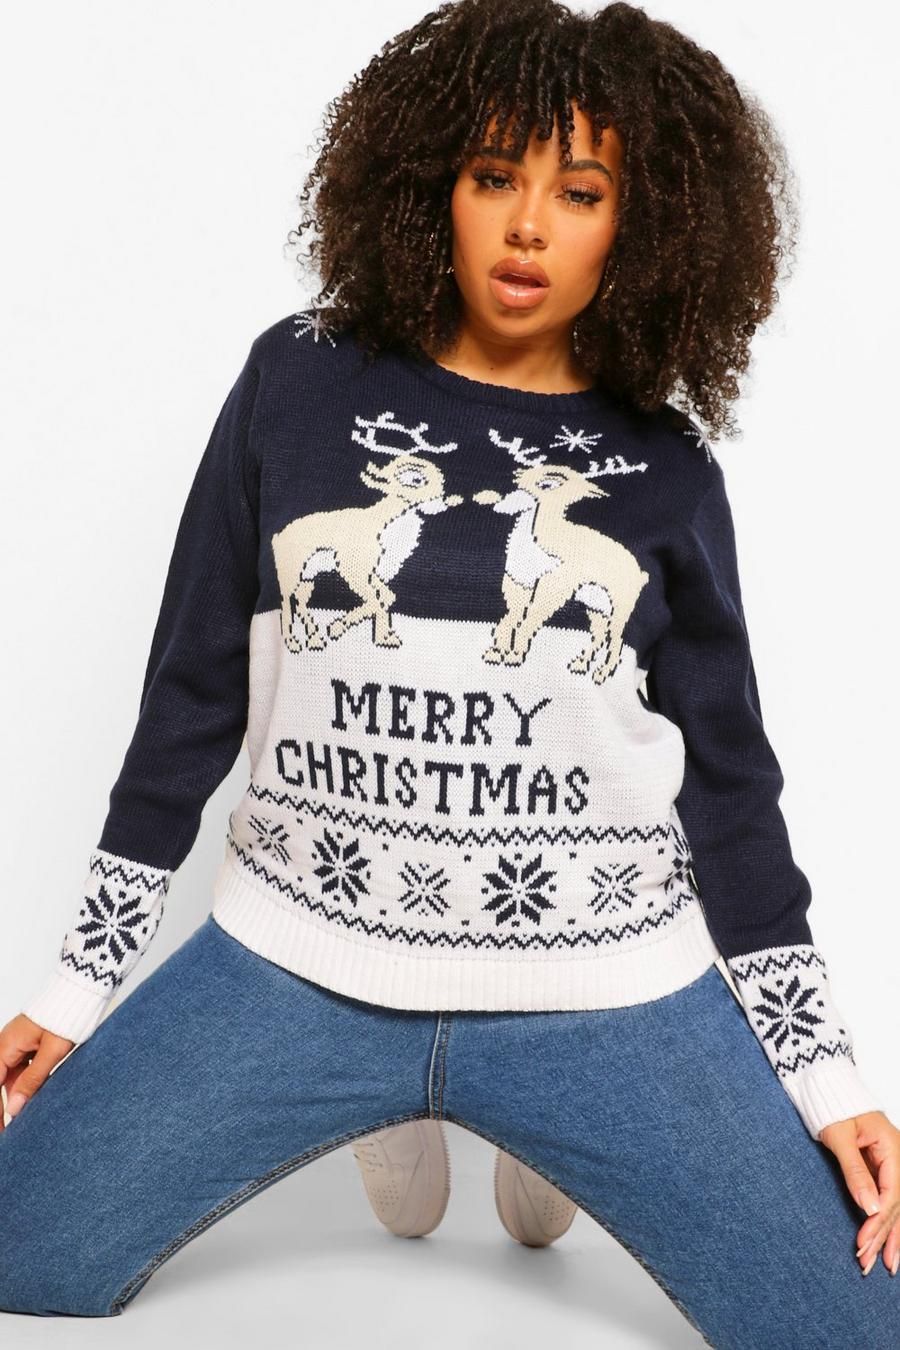 Plus Pullover “Merry Christmas” con renne image number 1